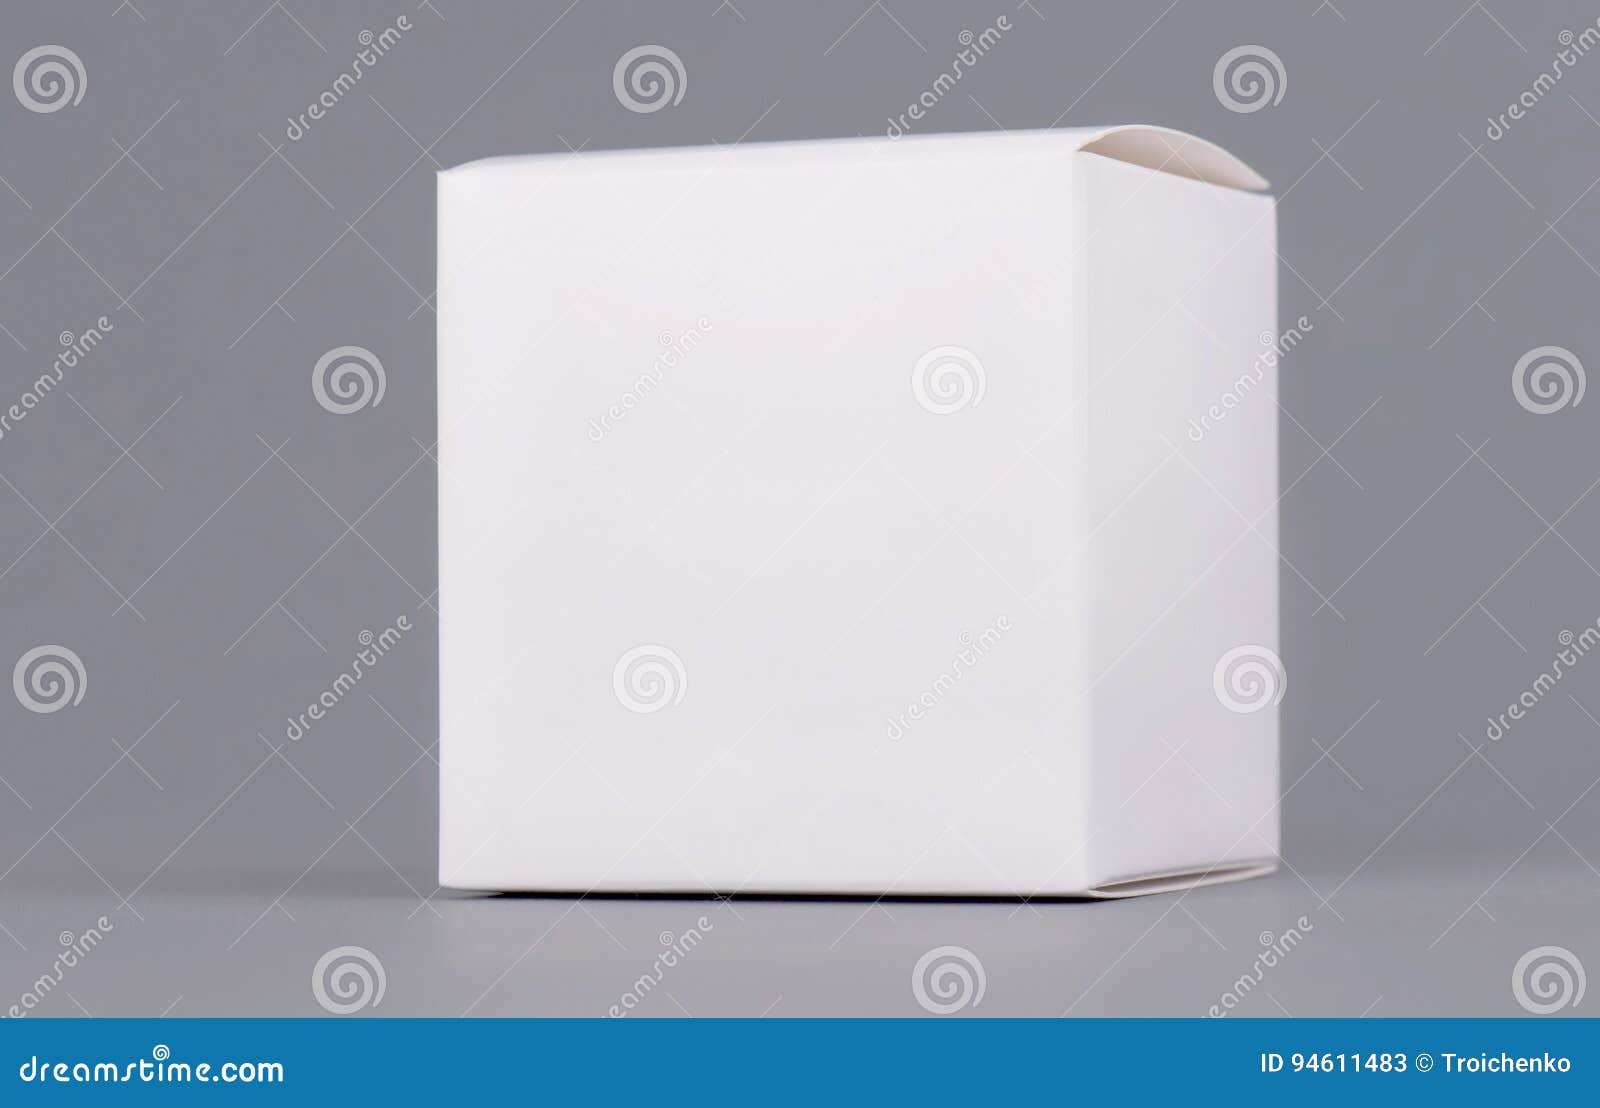 Download Square White Carton Product Box Mock Up, Side View, Clipping Path. Clean White Cardboard Blank ...